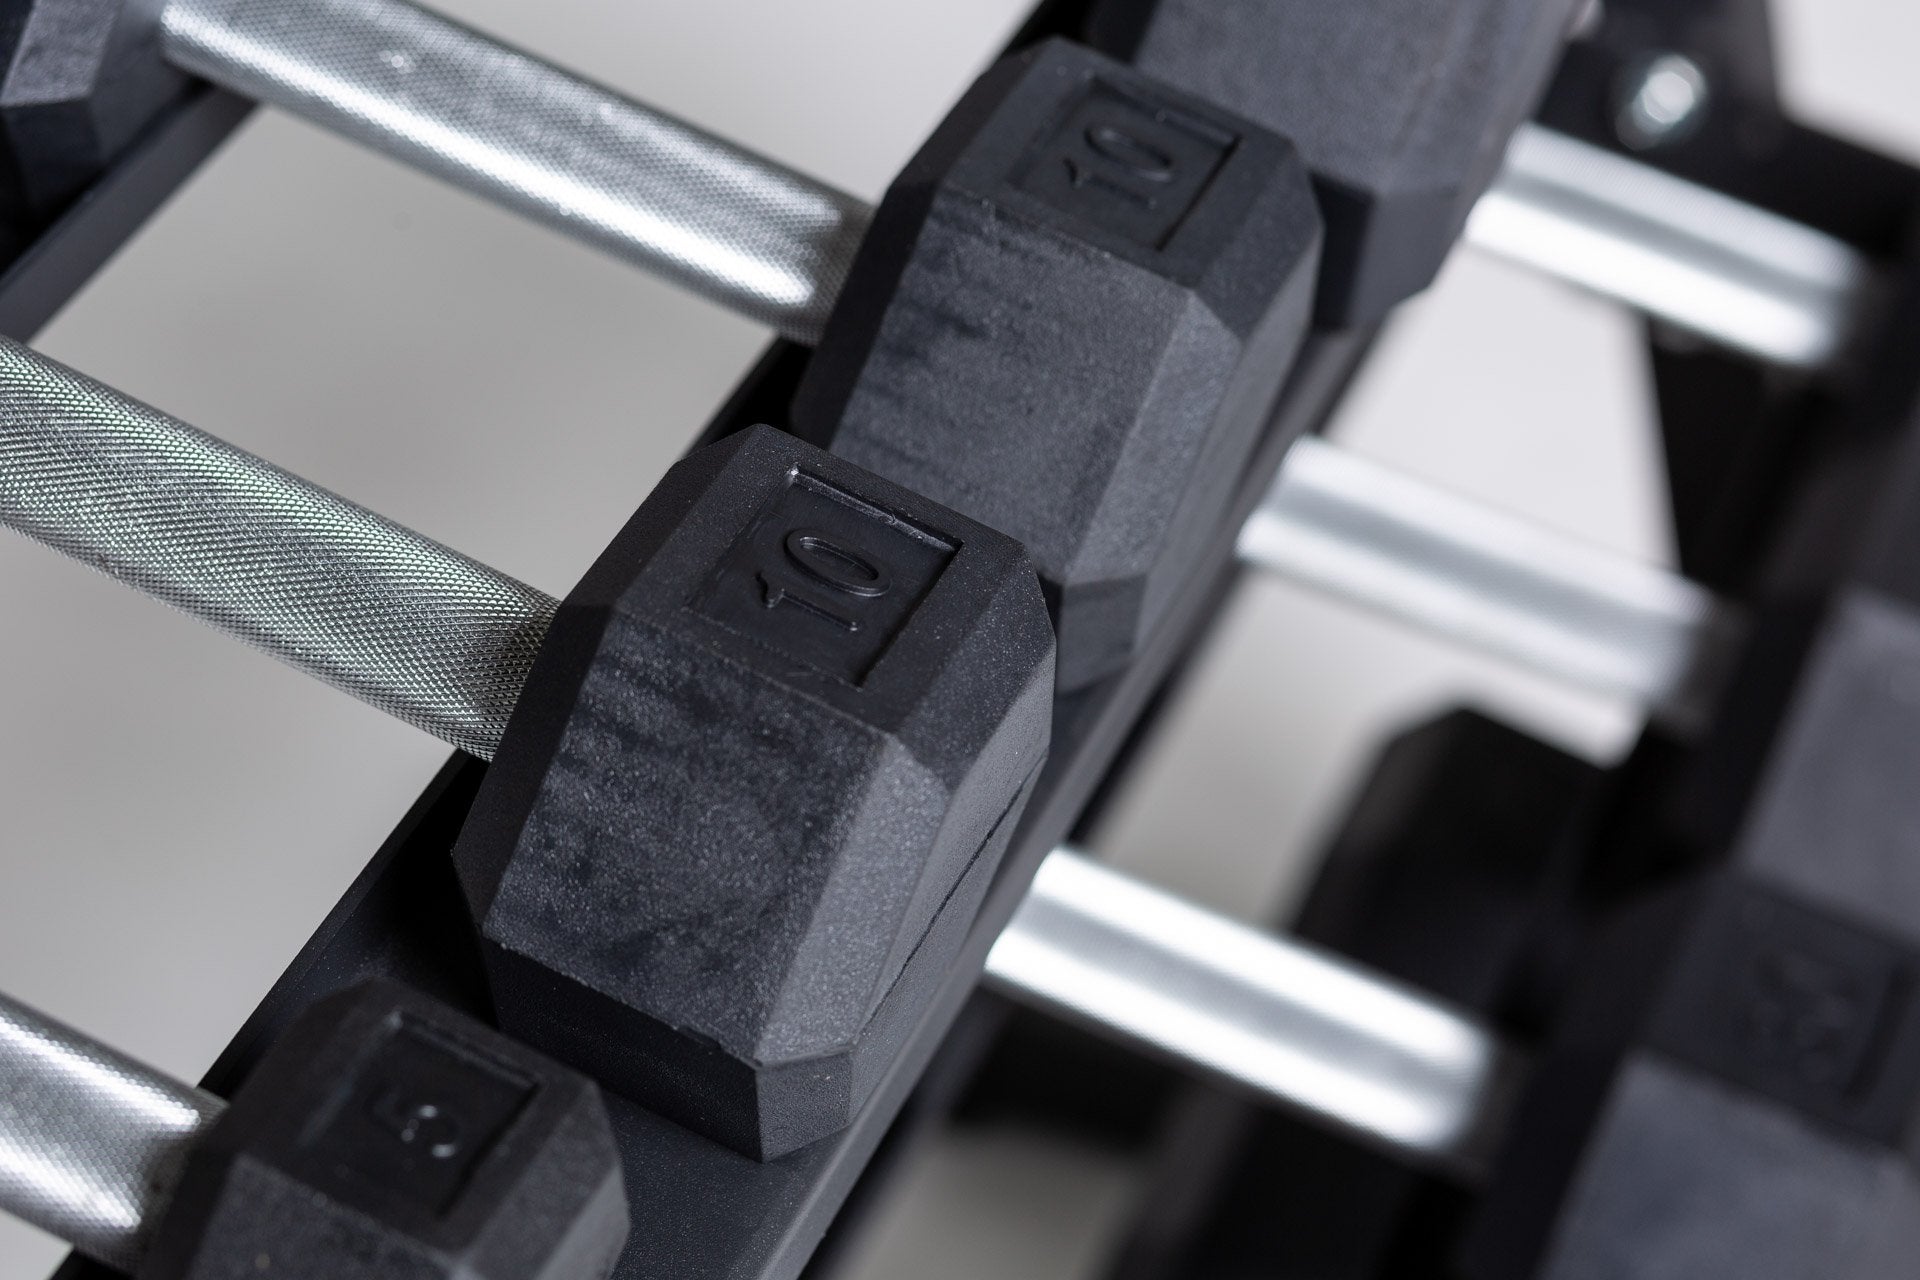 Close-up above view of the 10lb pair of a 5-50lb Hex Dumbbell Set being stored on the top shelf of a REP Dumbbell Rack.